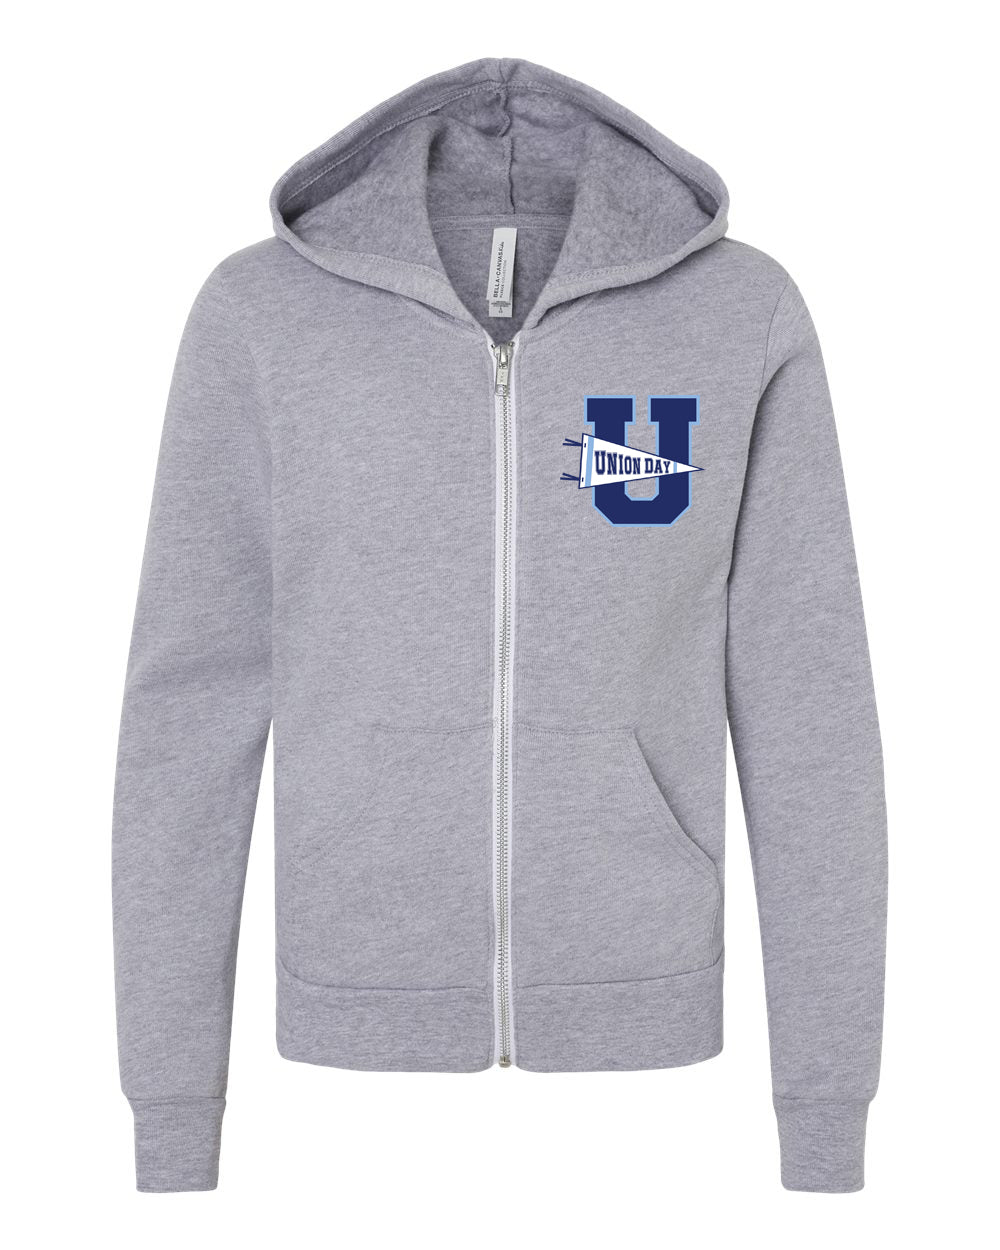 UD Zip Up Youth/Adult